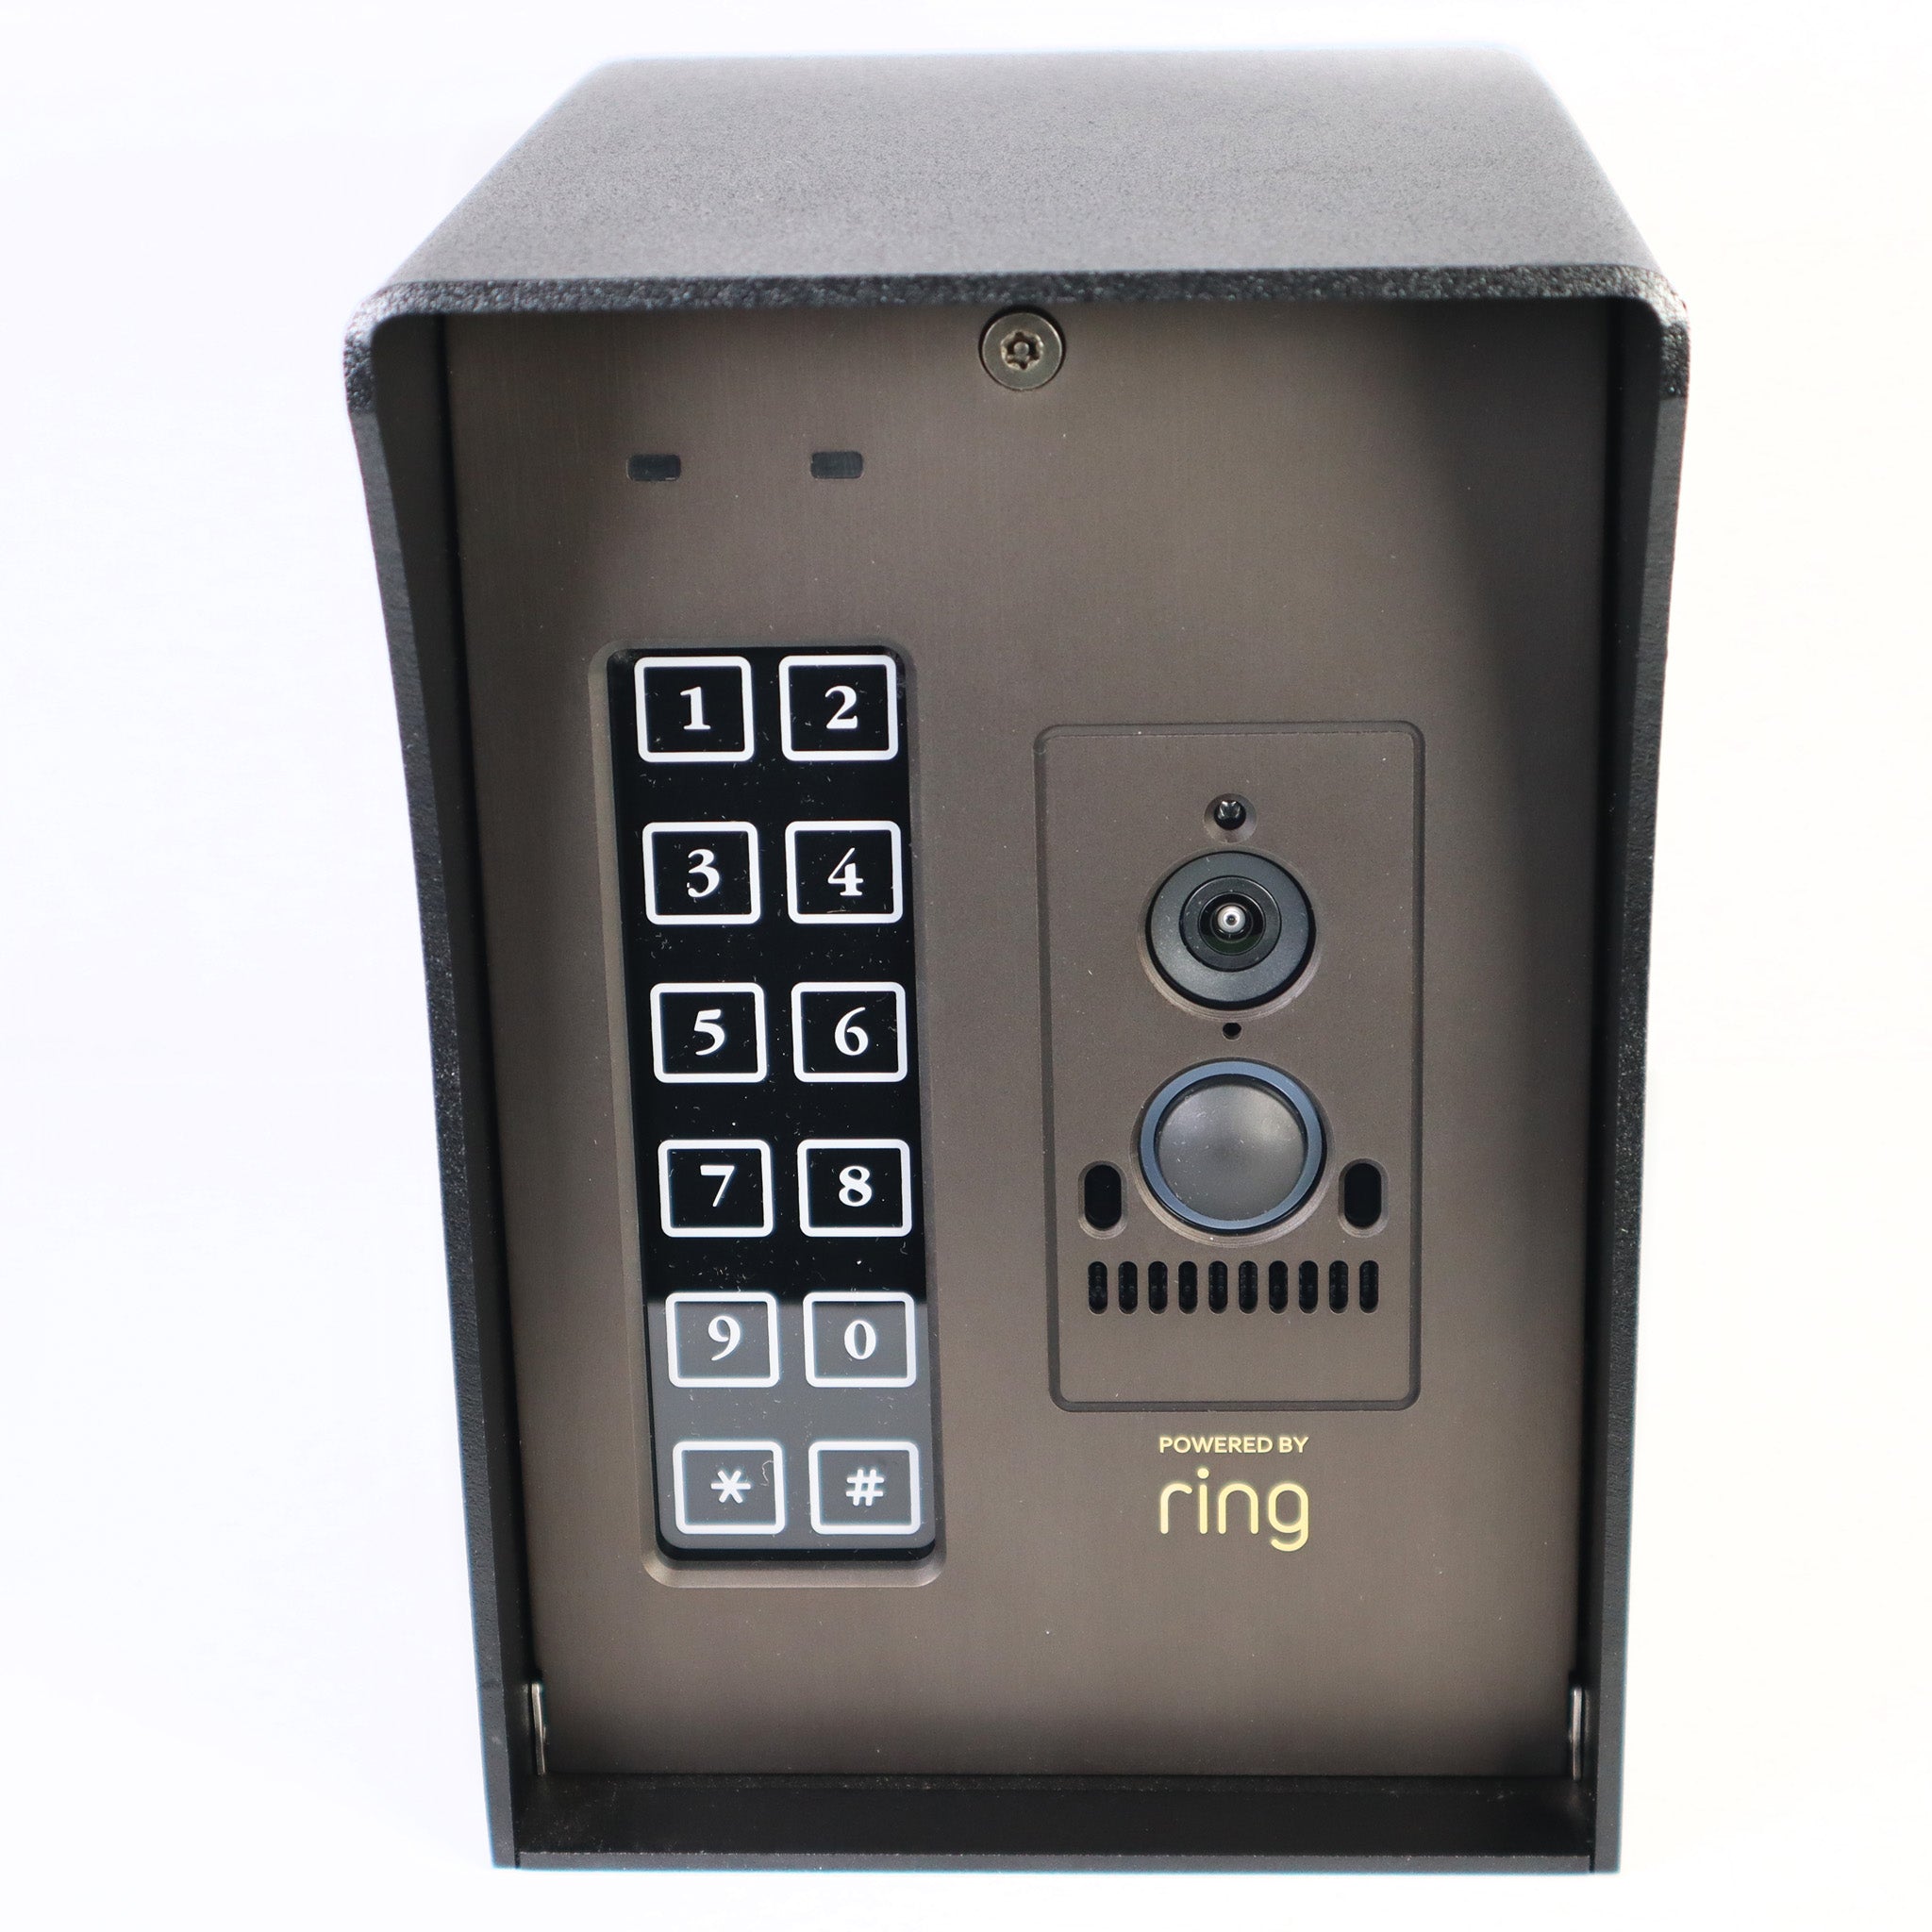 Holovision 600-S12-RING Access System with Standalone keypad and Ring Elite Video Intercom module